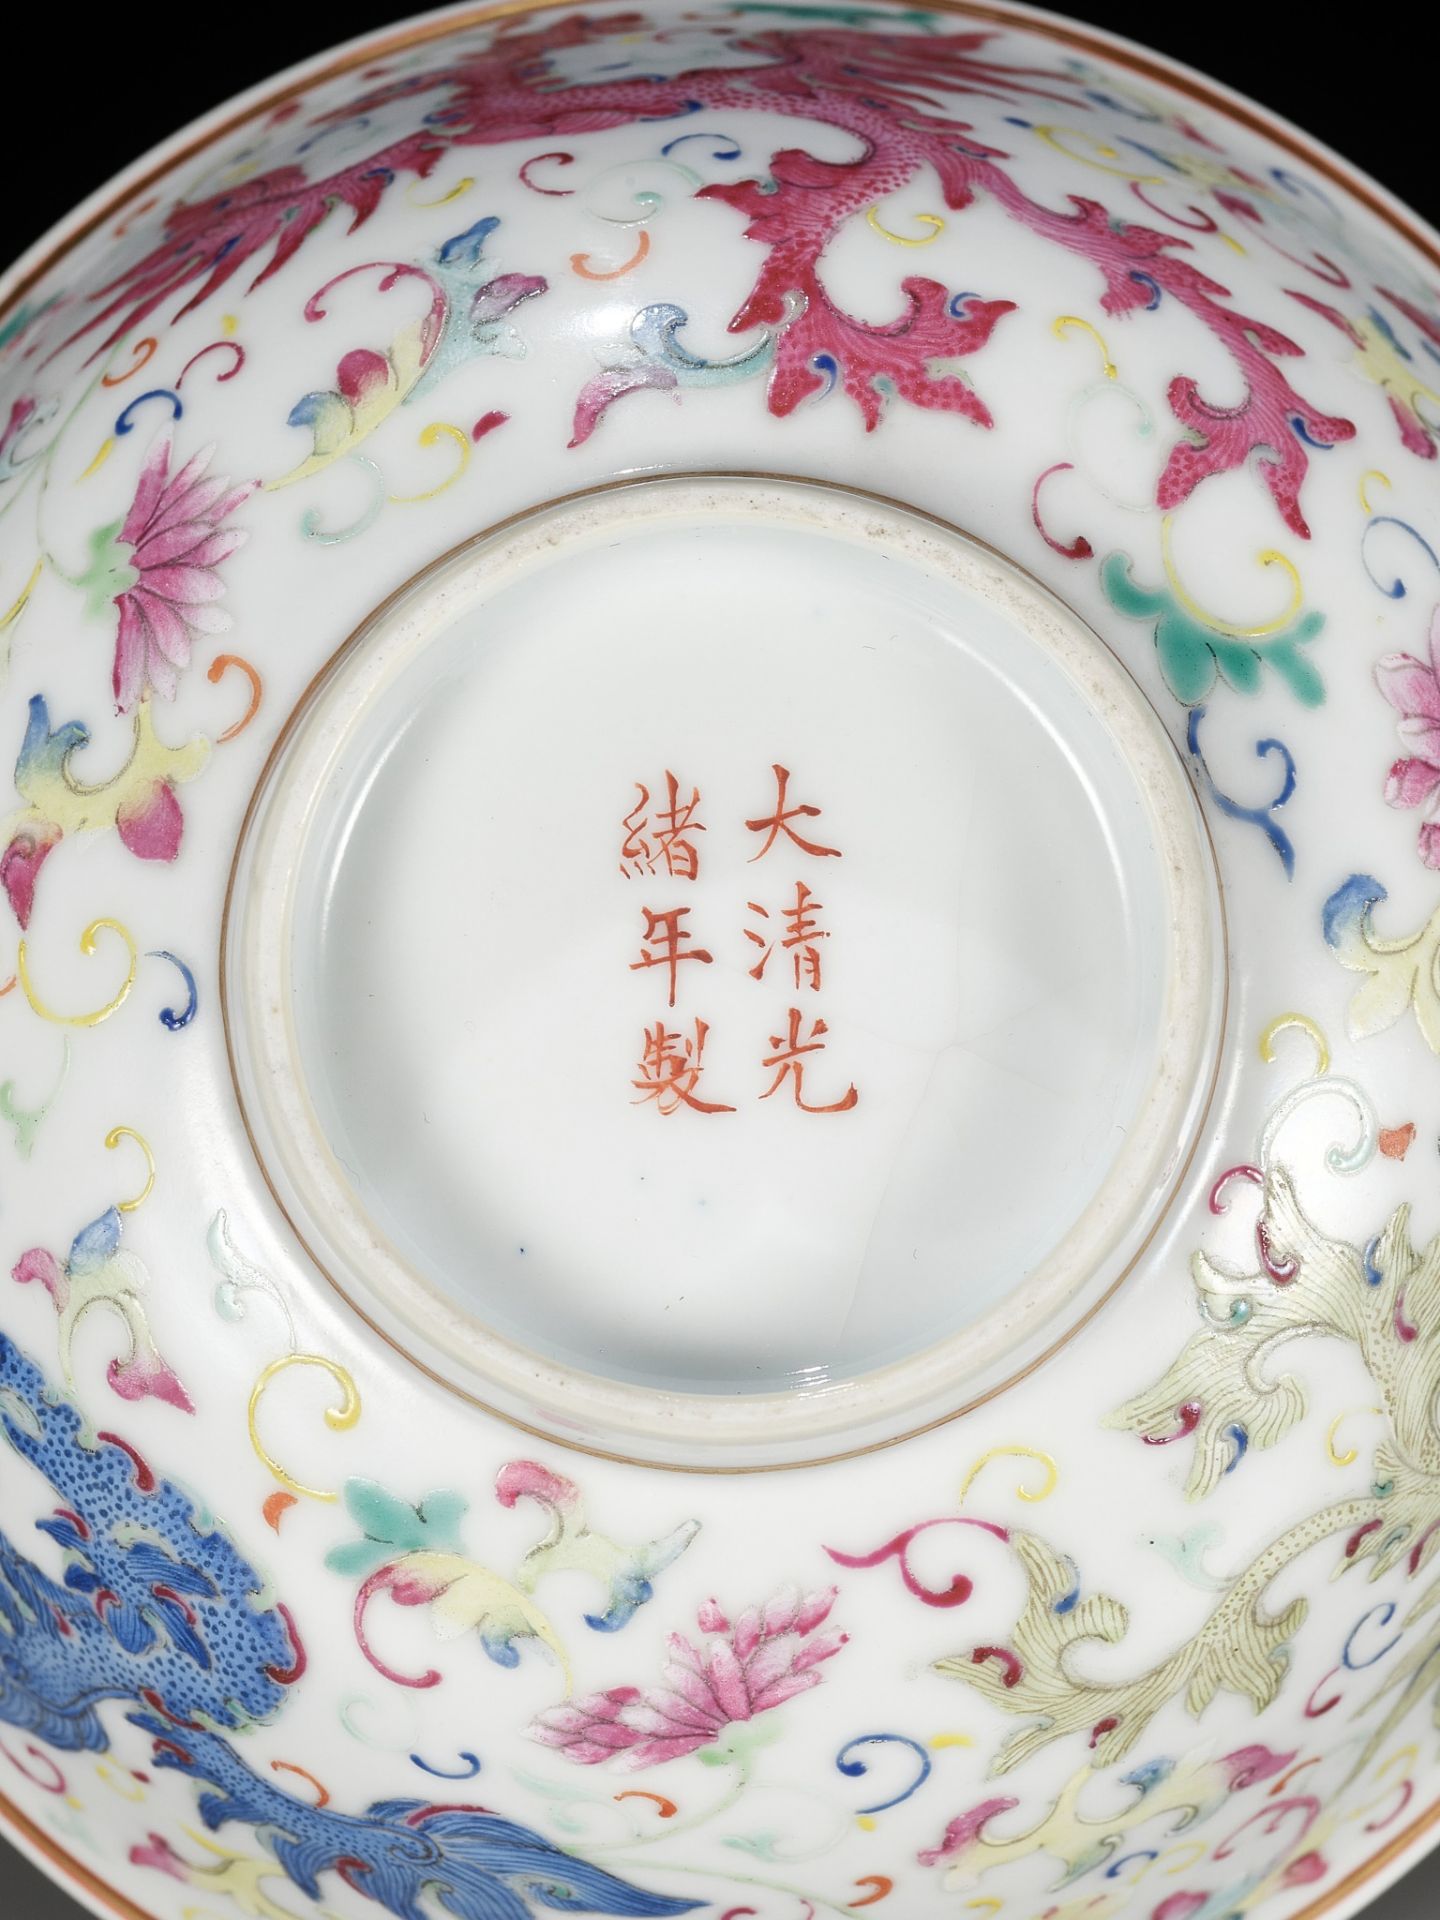 A PAIR OF FAMILLE-ROSE 'PHOENIX' BOWLS, GUANGXU MARK AND PERIOD - Image 2 of 16